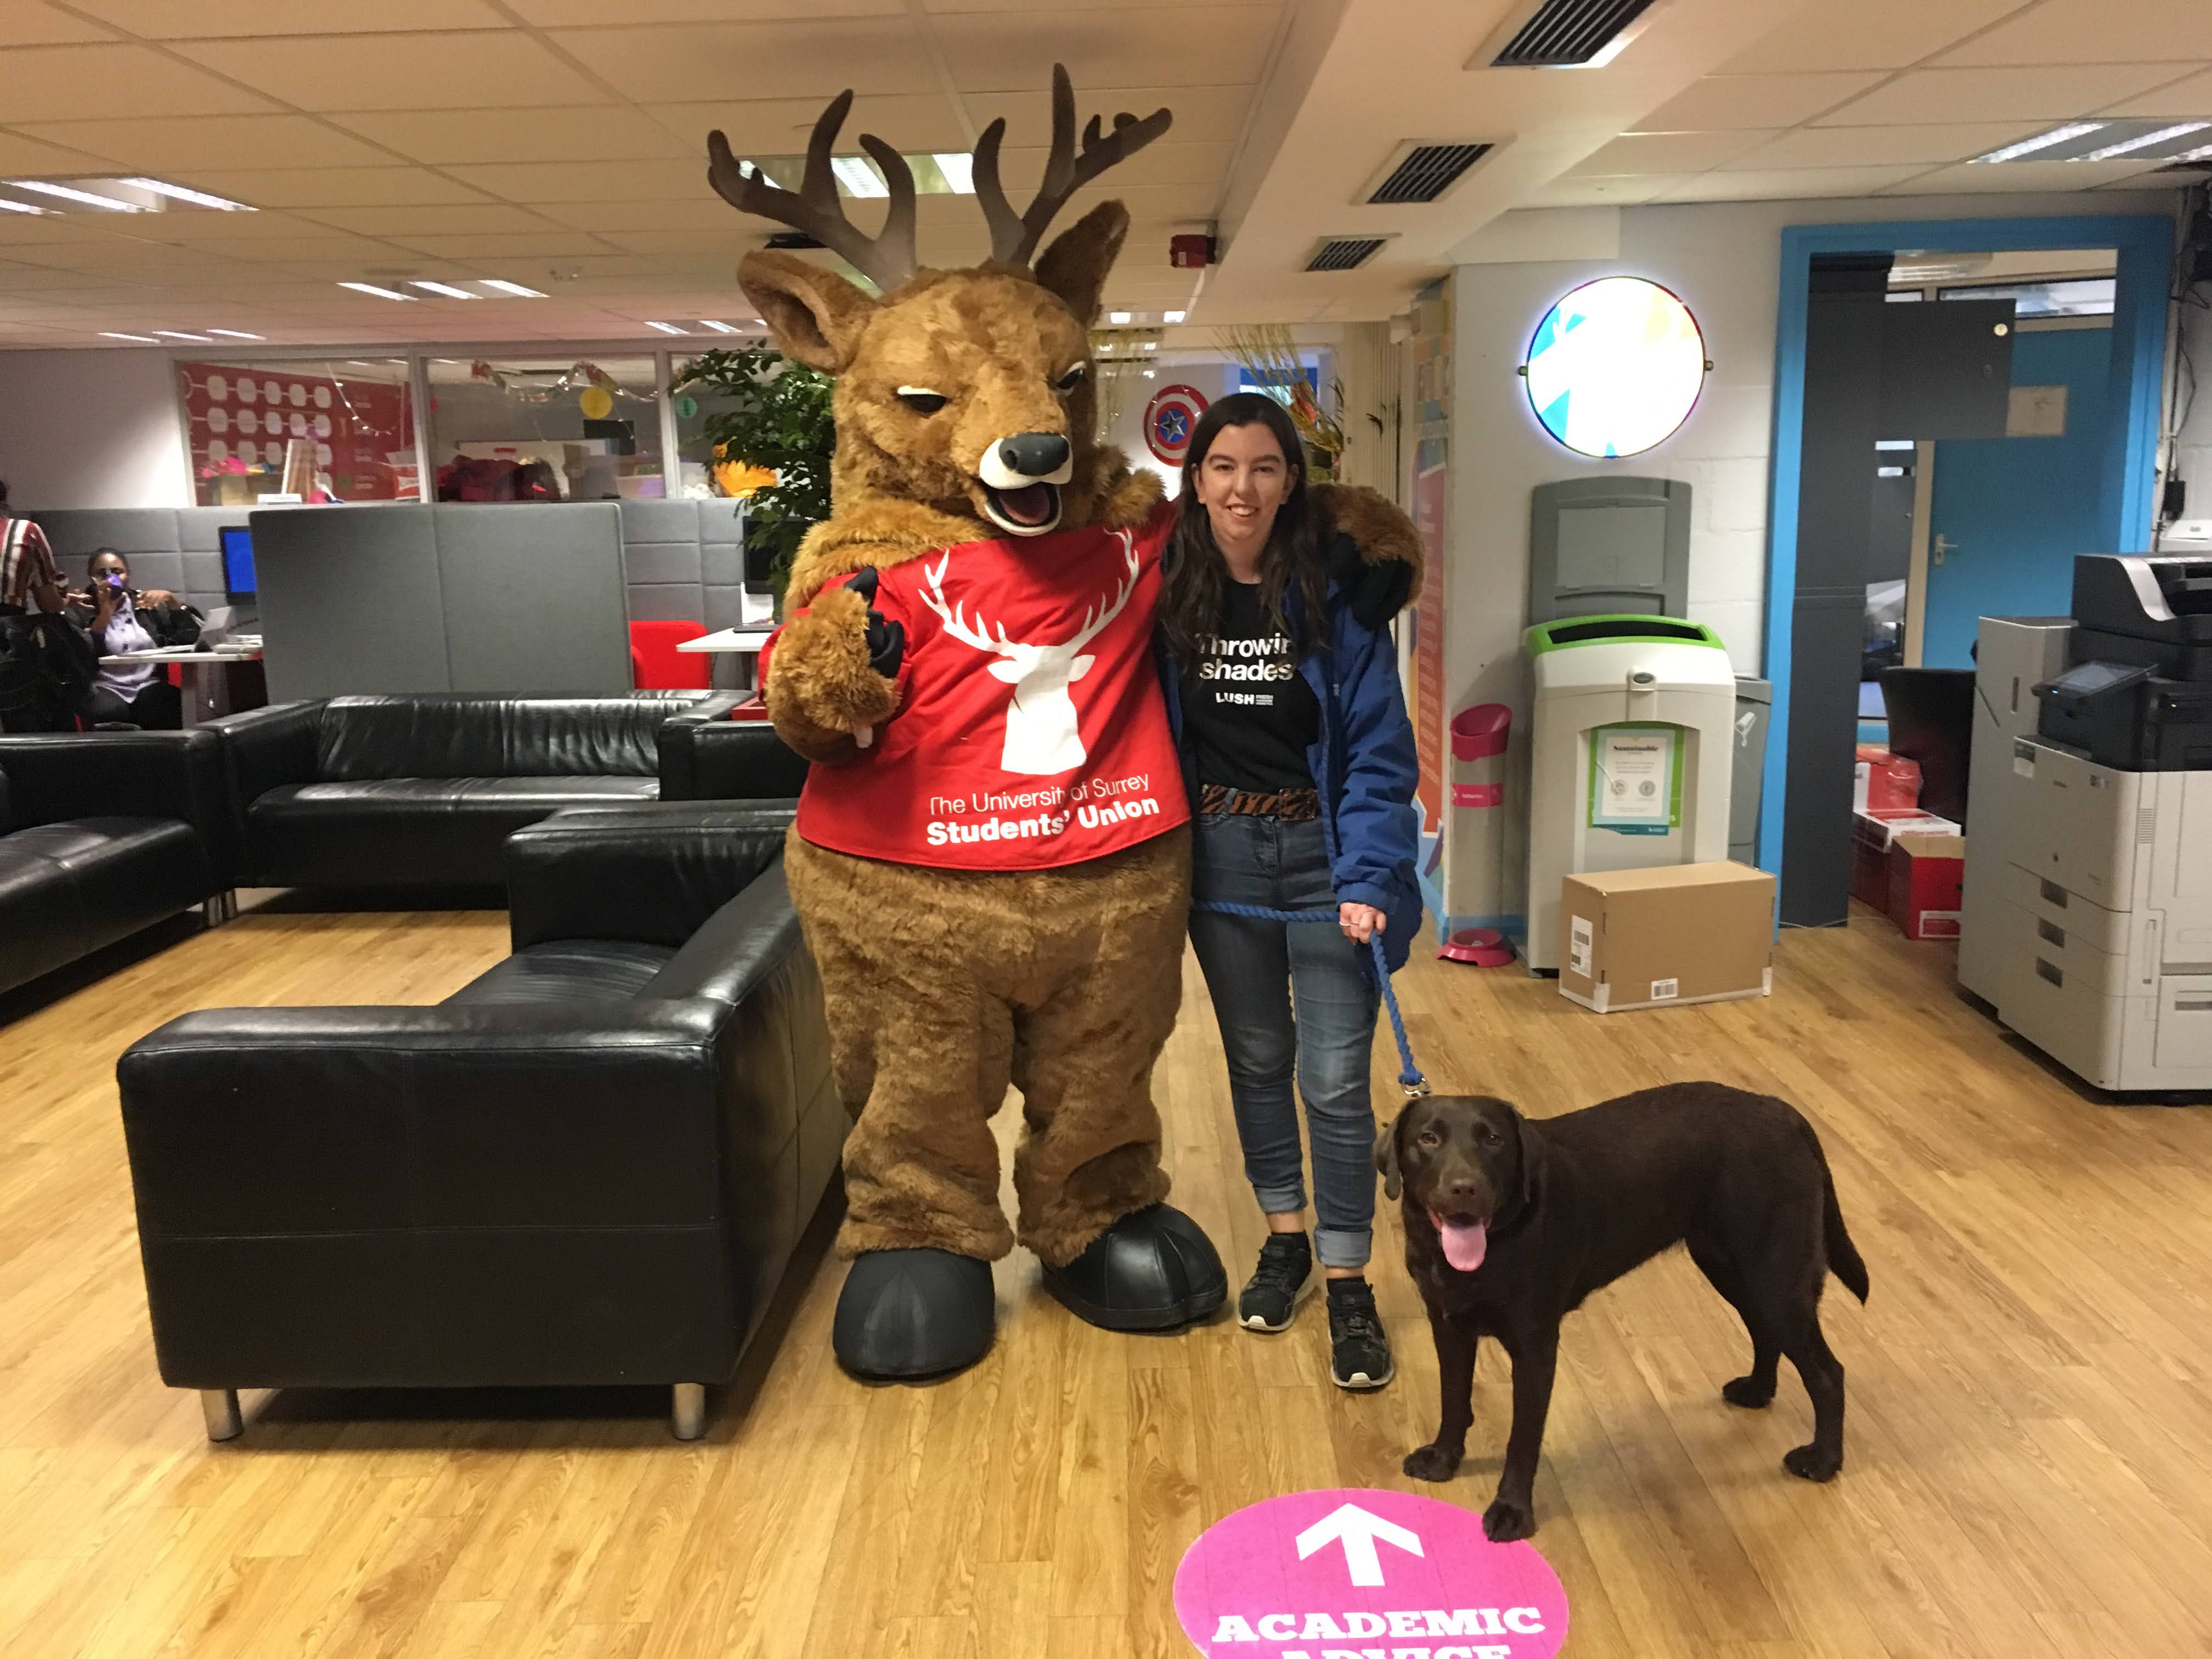 Student with brown labrador retriever with Steve the Stag mascot having a photo taken. 